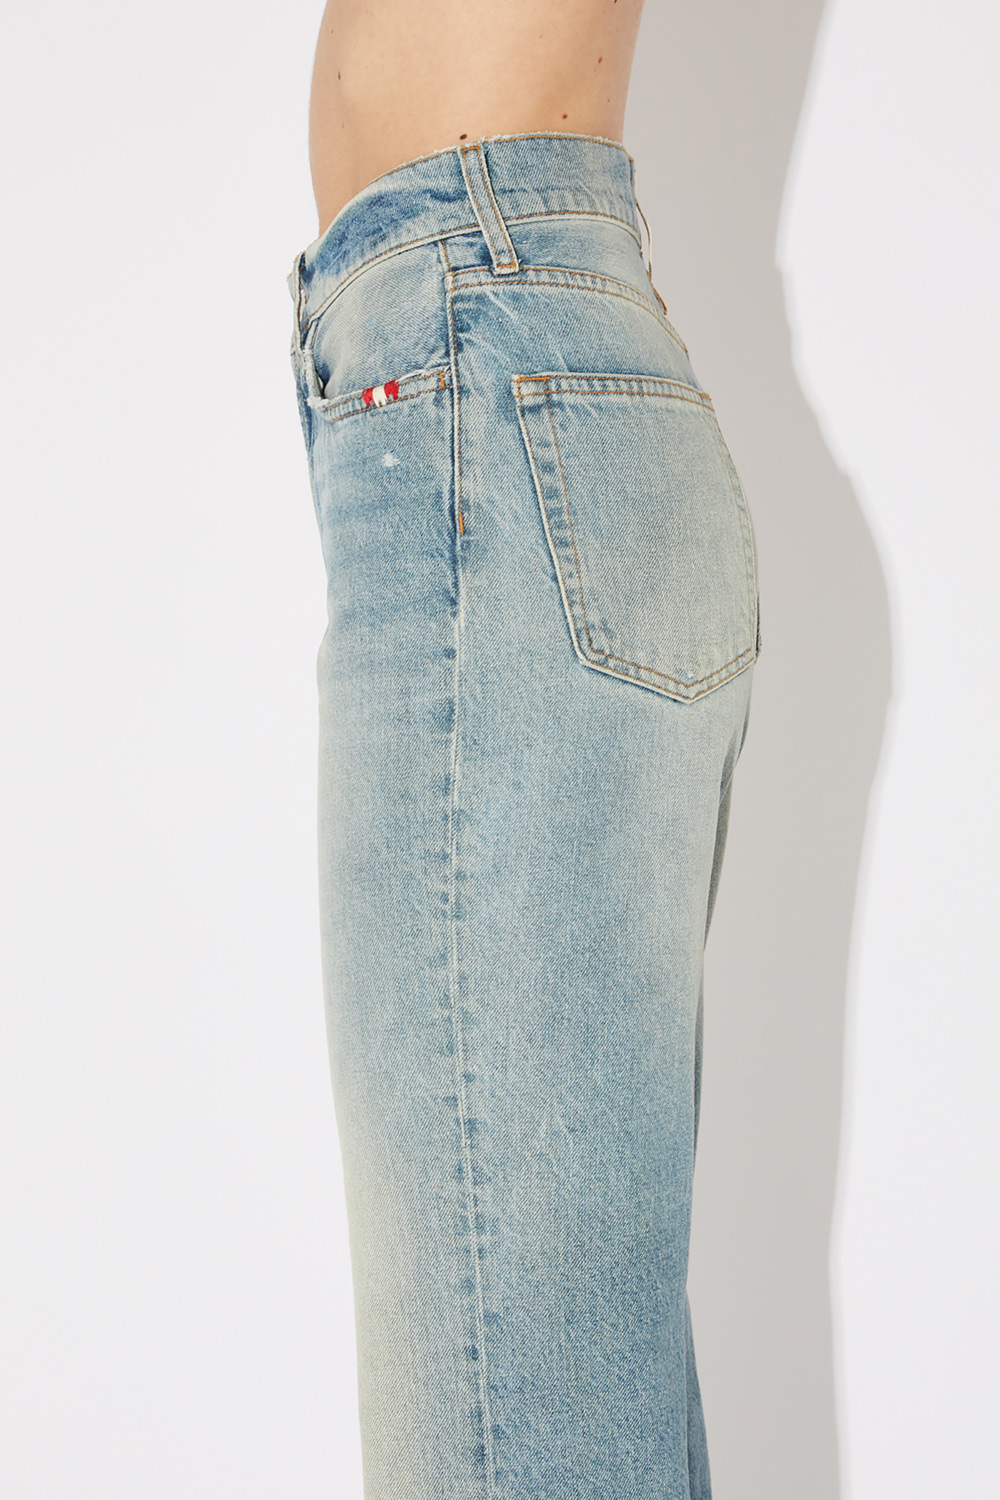 AMISH: JEANS KENDALL REAL VINTAGE